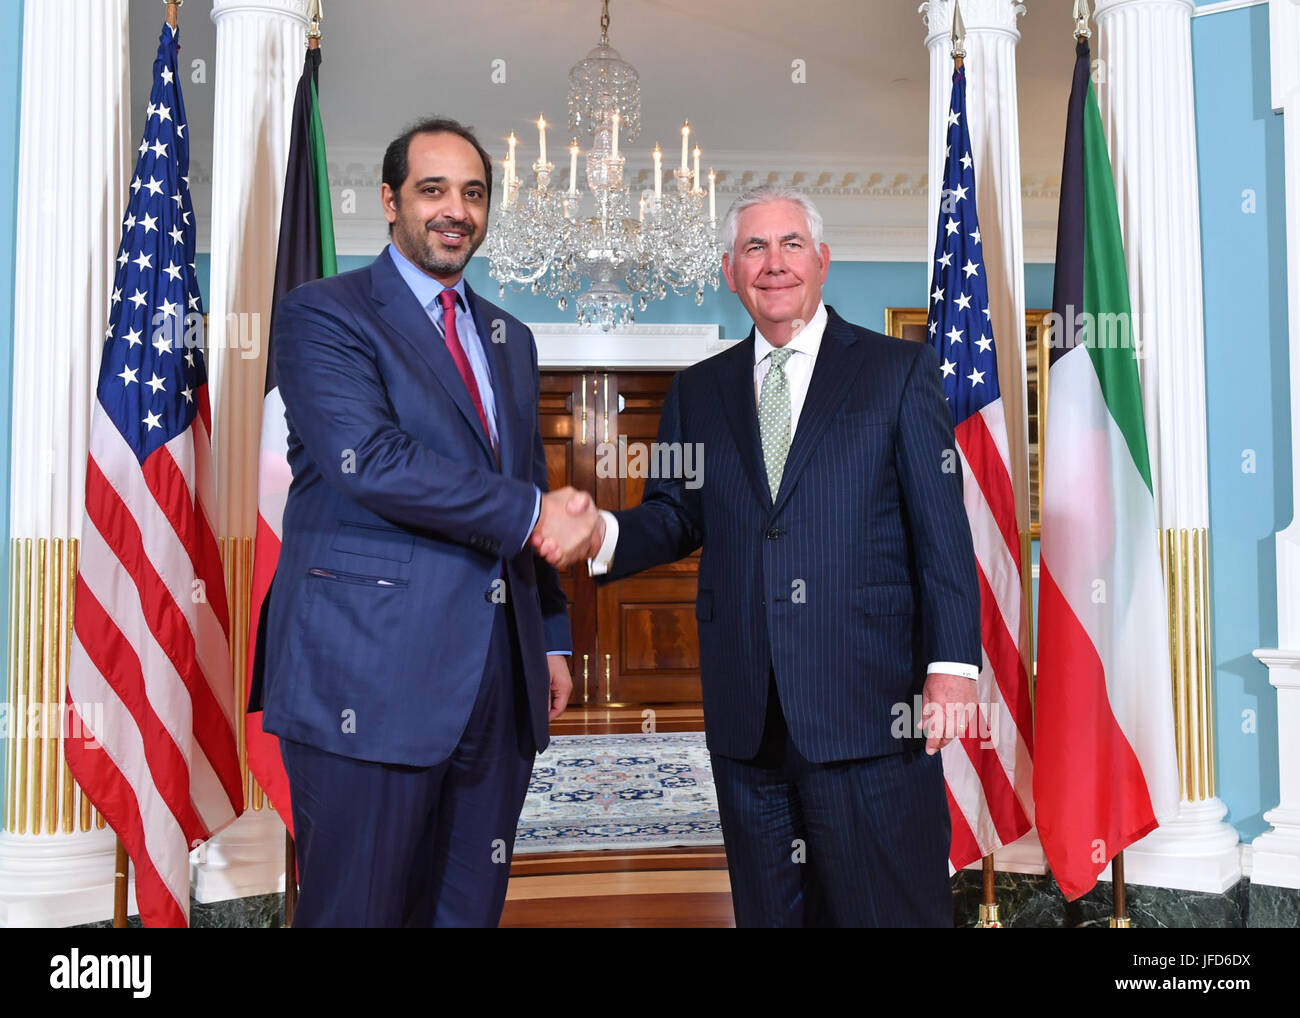 U.S. Secretary of State Rex Tillerson poses for a photo with Kuwaiti Minister of State for Cabinet Affairs and Acting Minister of Information Sheikh Mohammad Abdullah Al-Sabah before their meeting at the U.S. Department of State in Washington, D.C., on June 27, 2017. Stock Photo